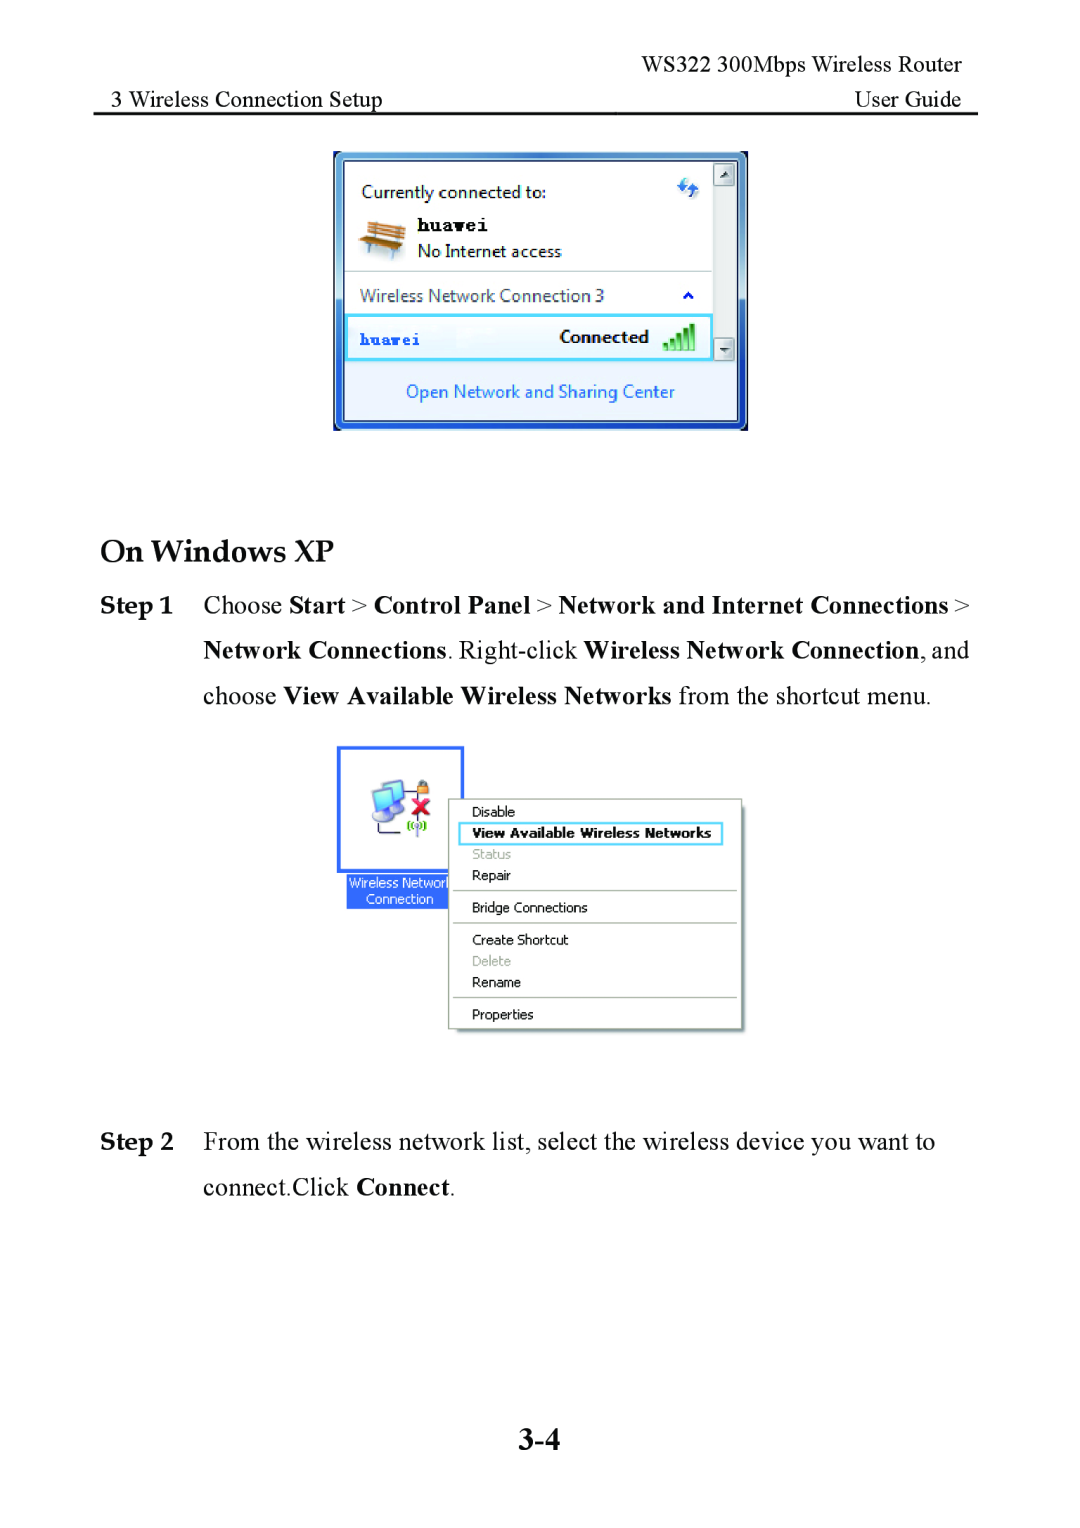 Huawei manual On Windows XP, Wireless Connection Setup, User Guide, WS322 300Mbps Wireless Router 